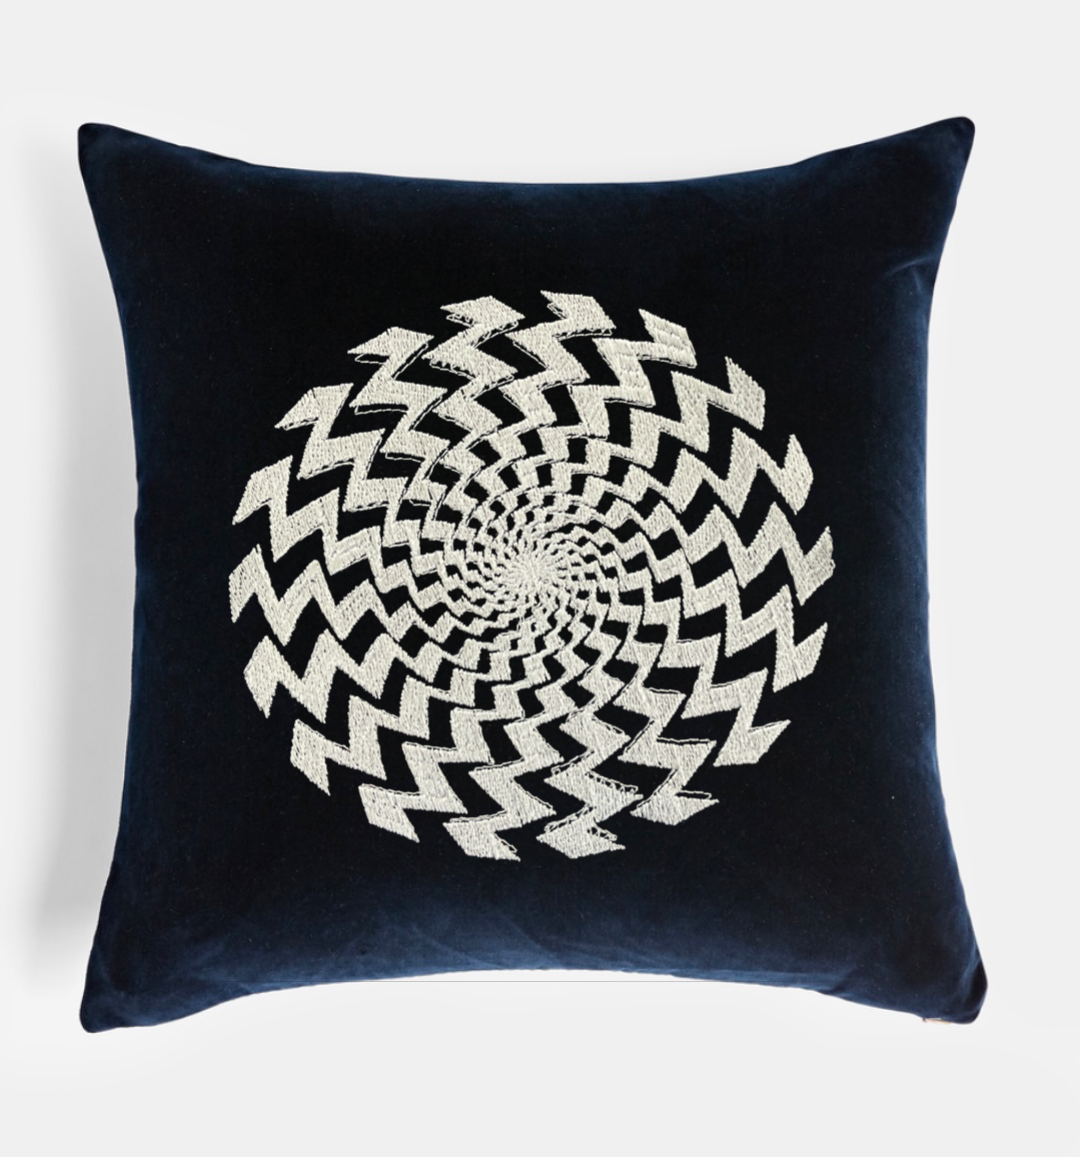 Modern Spiral Embroidered Decorative Pillow Cover 18" x 18"